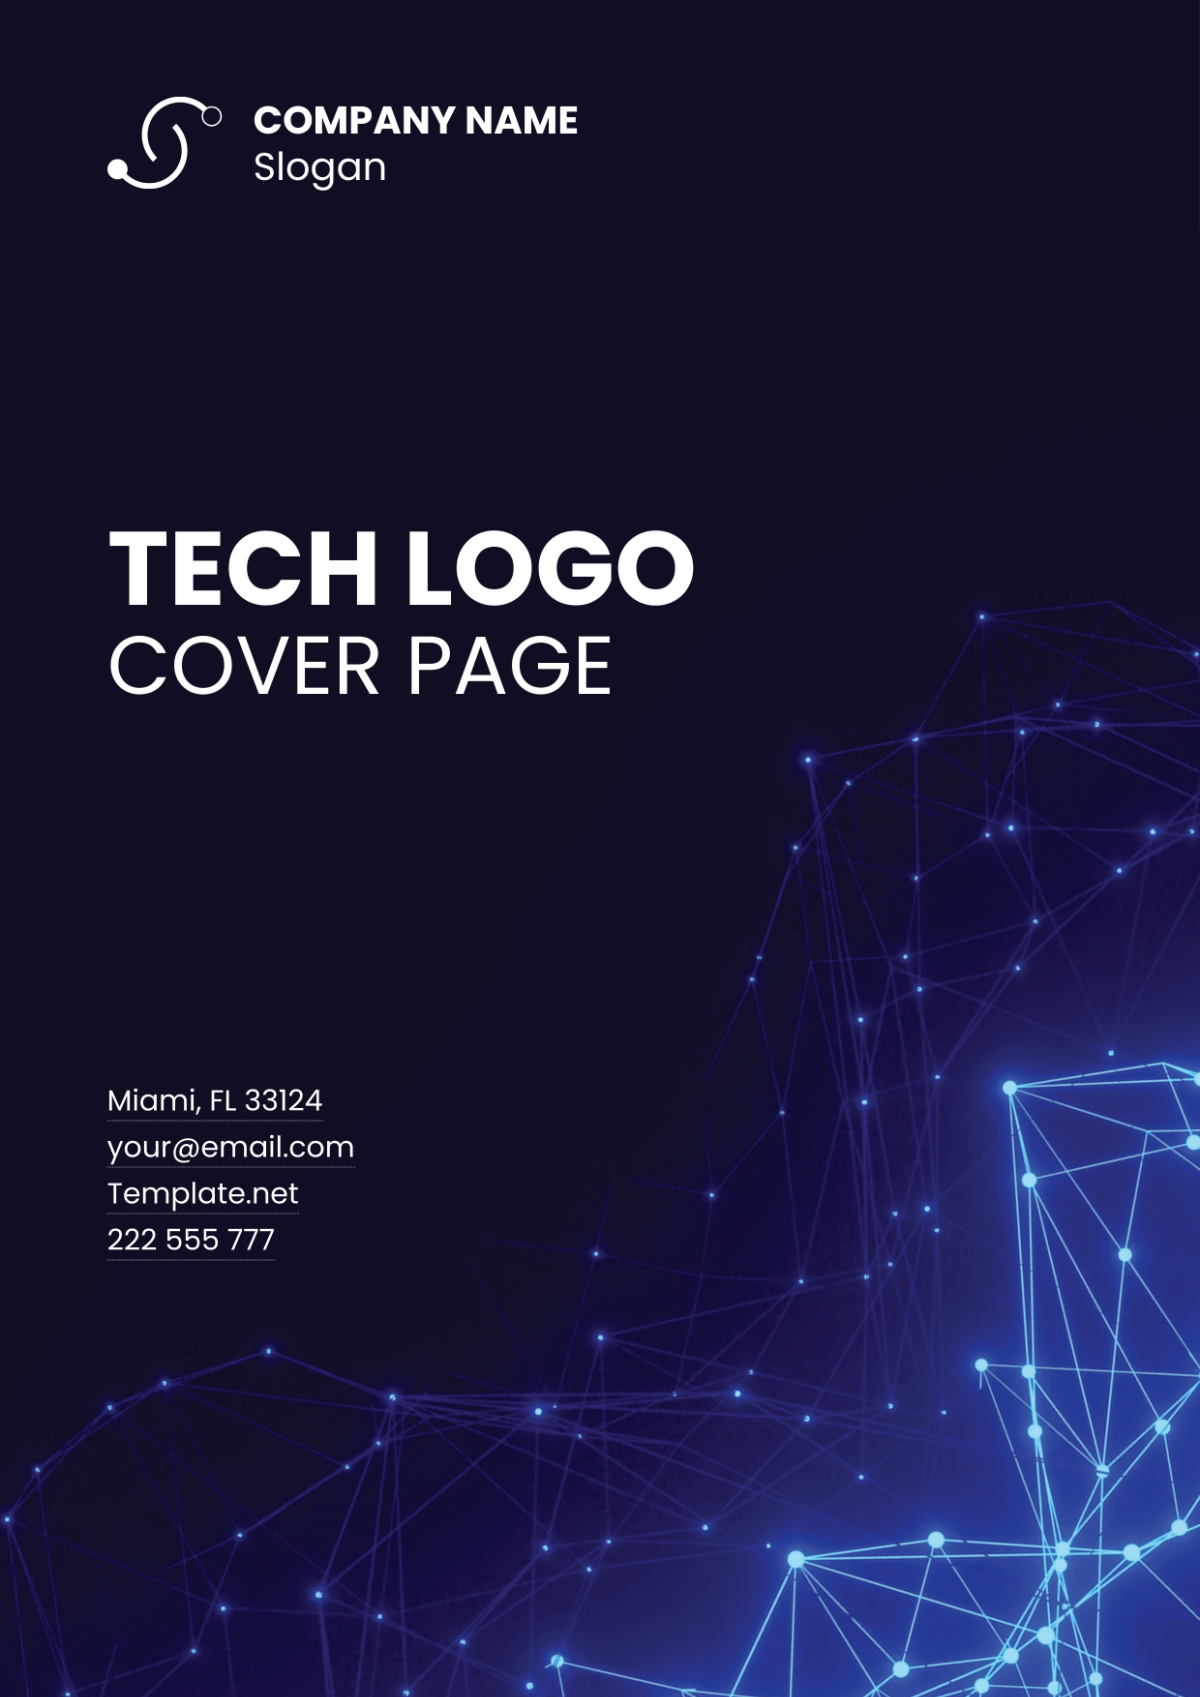 Free Tech Logo Cover Page Template